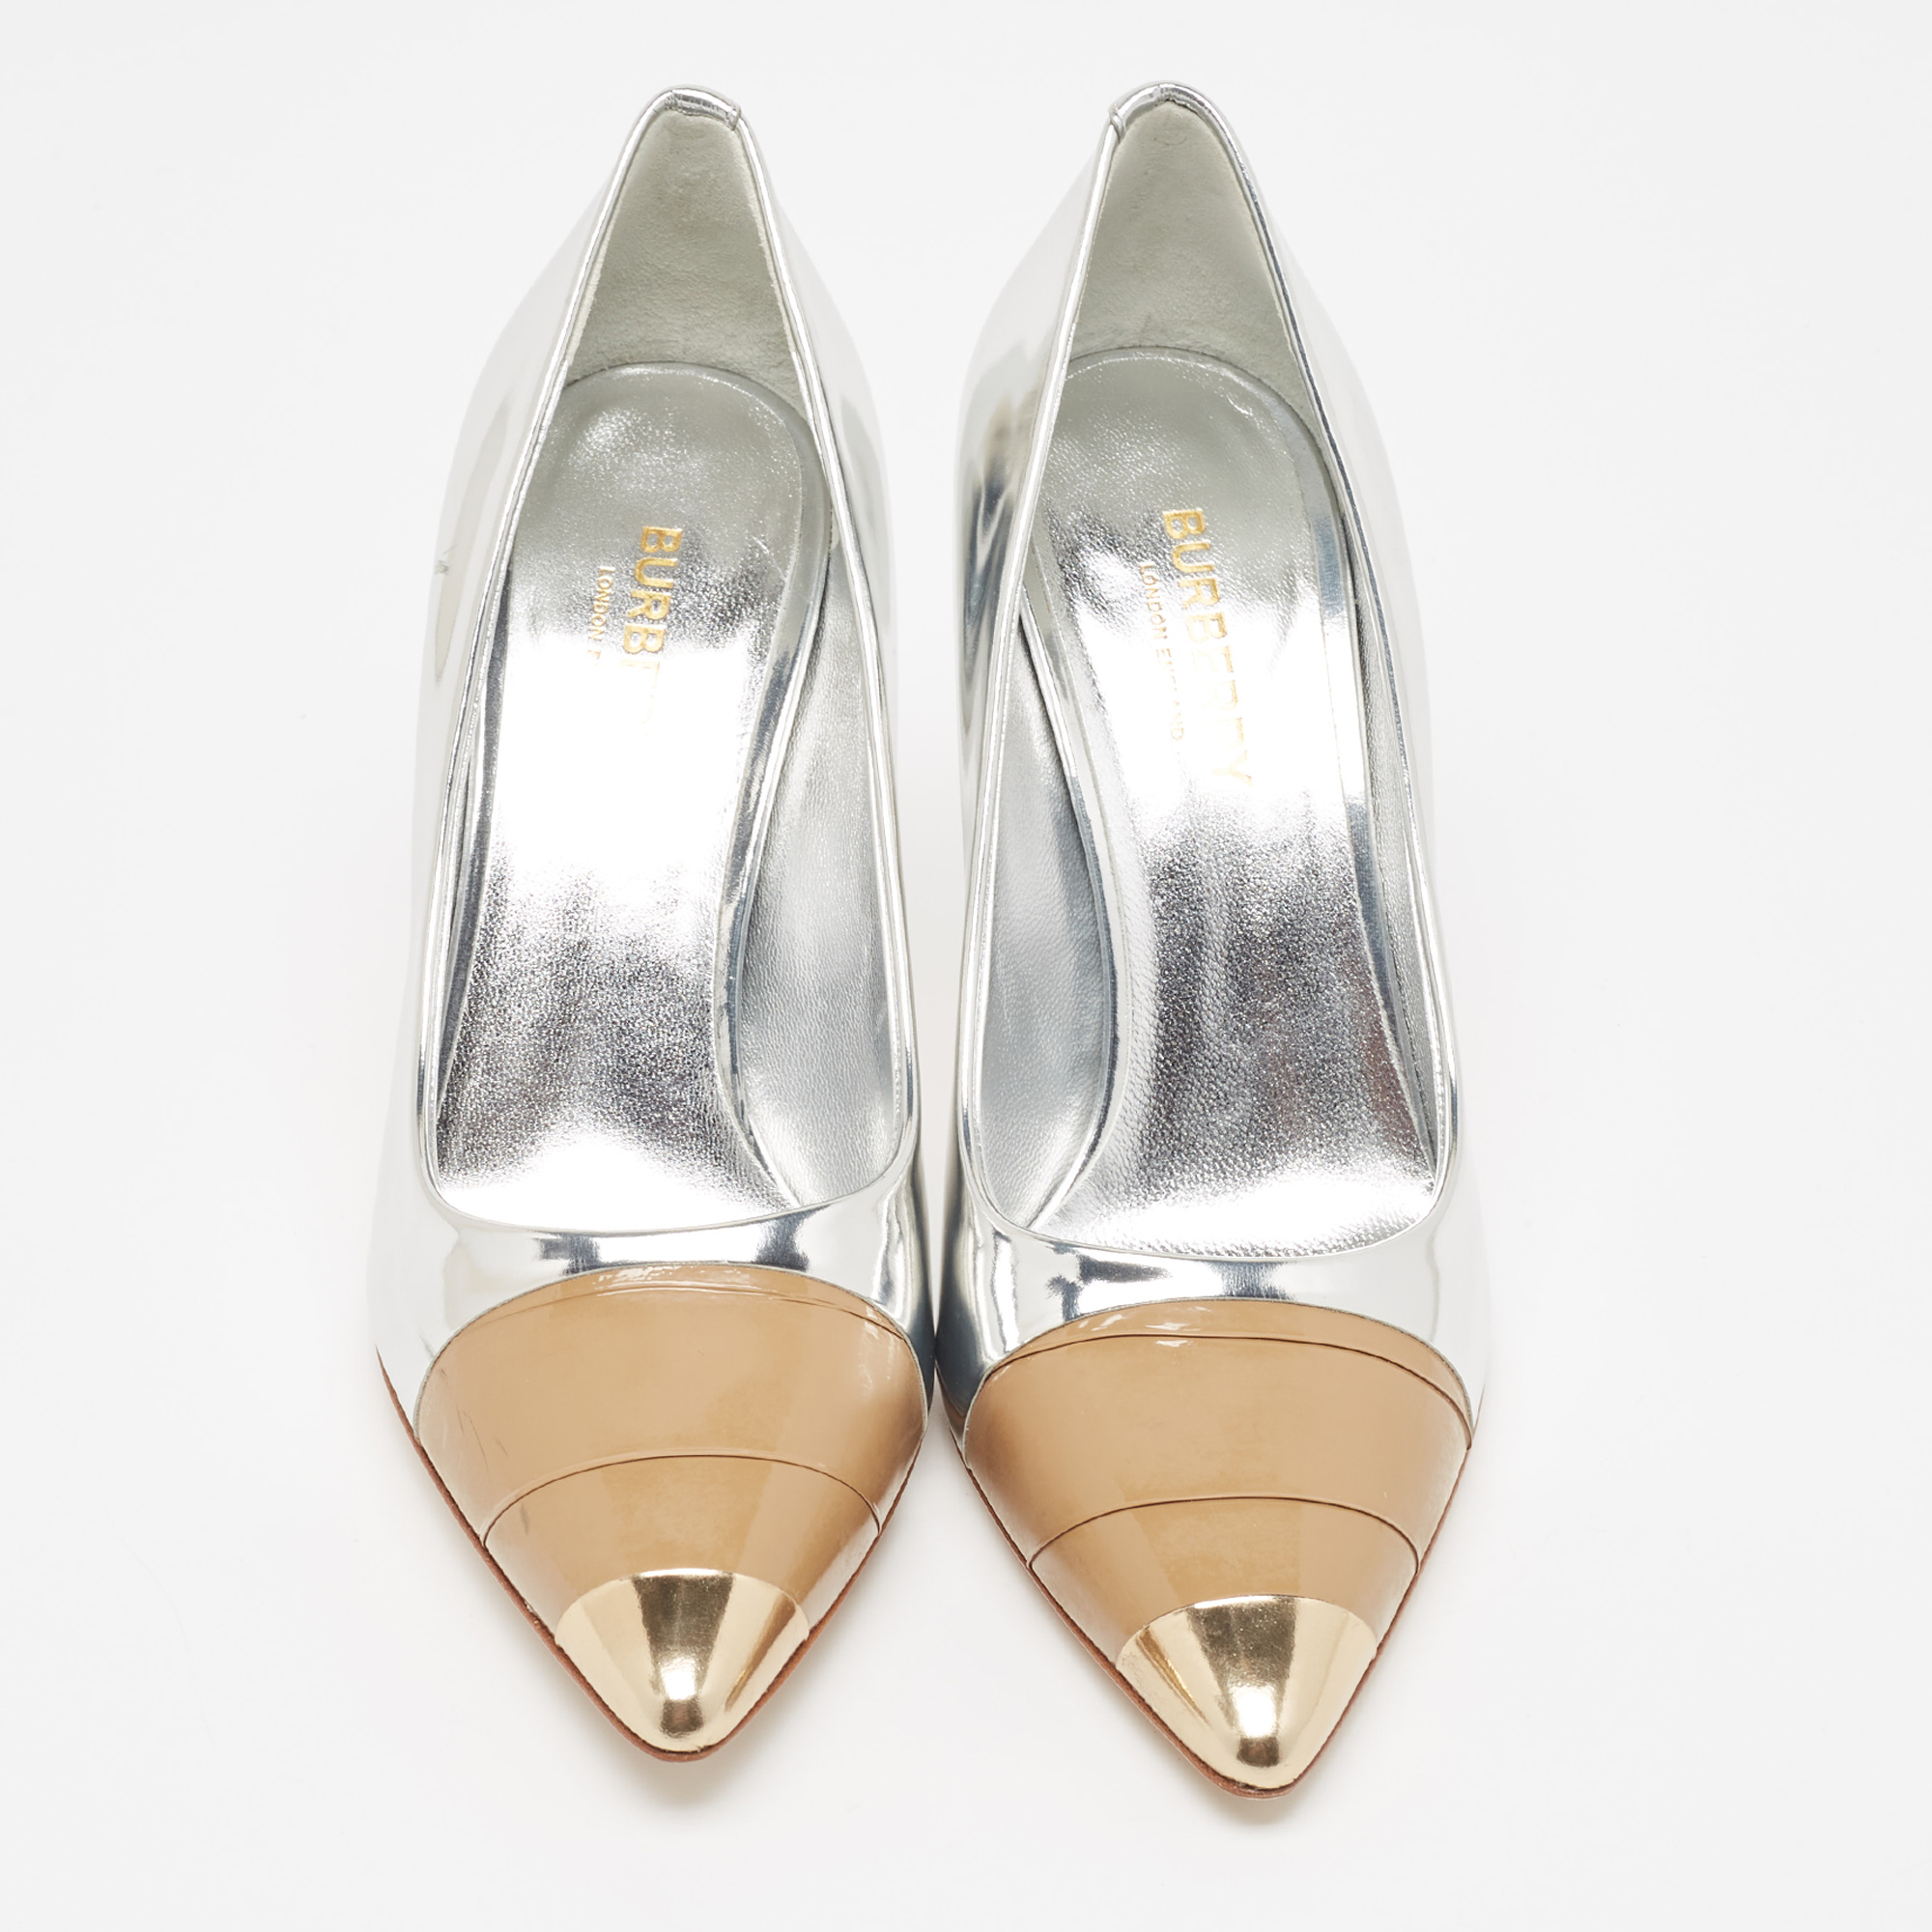 Burberry Silver Patent Pointed Toe Pumps Size 36.5